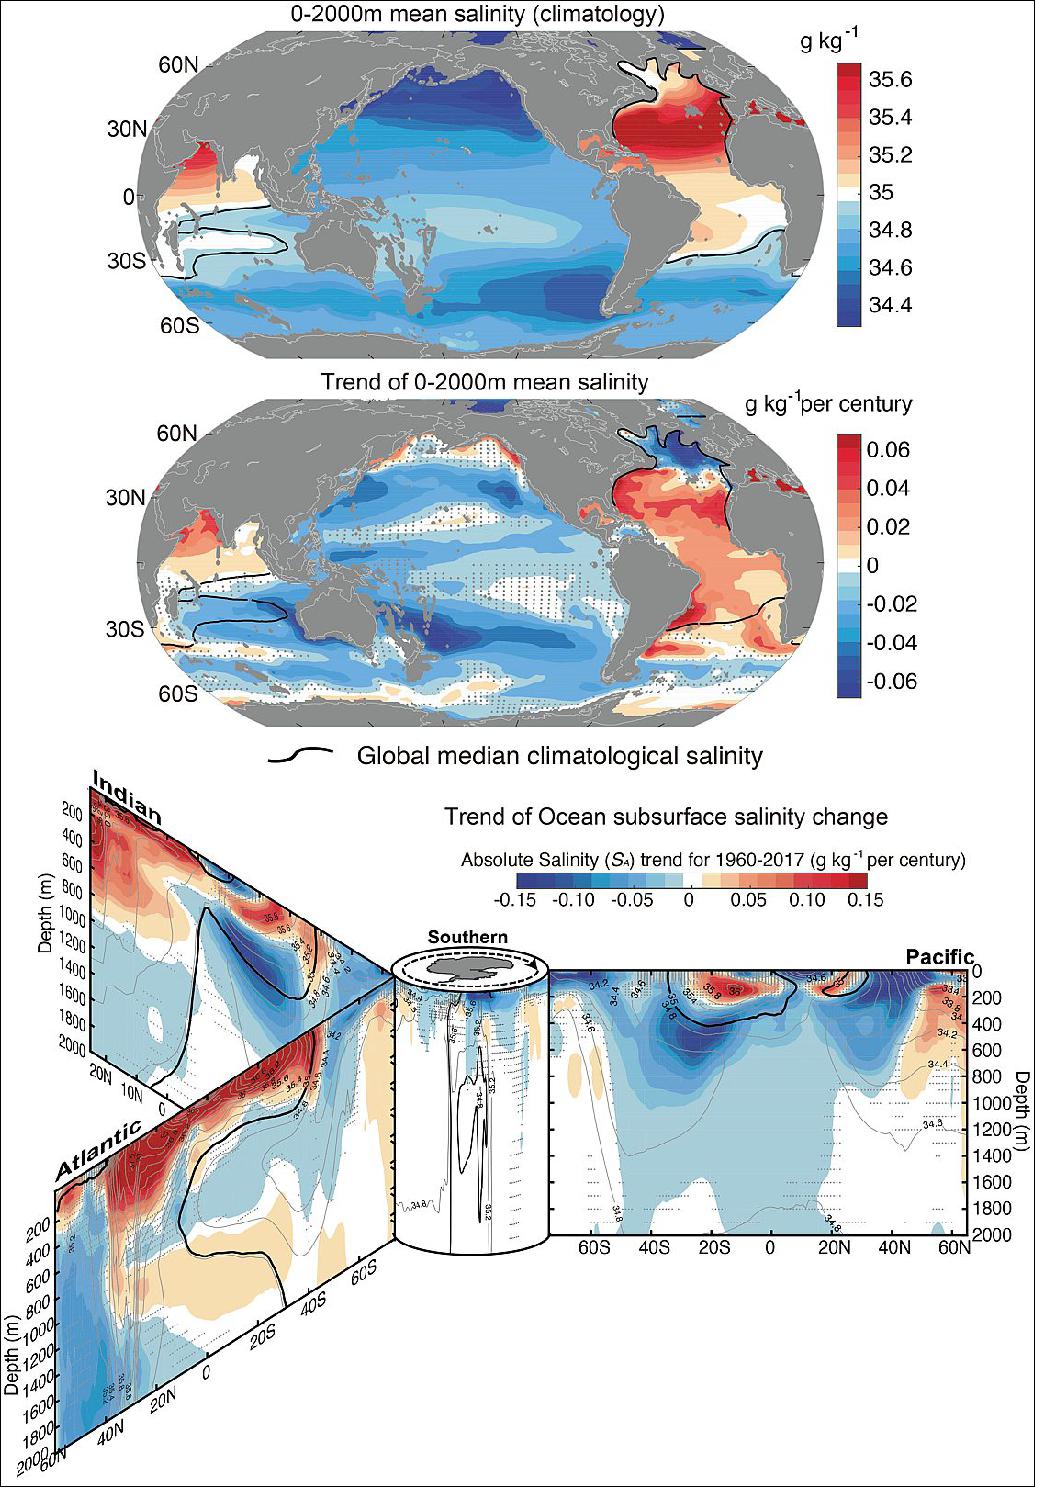 Figure 70: The 0-2000 mean salinity climatology (top) shows the relatively fresh Pacific versus the salty Atlantic northern Indian Ocean. Its long-term trend (middle) has a remarkably similar pattern (image credit: Ocean salinity study team)